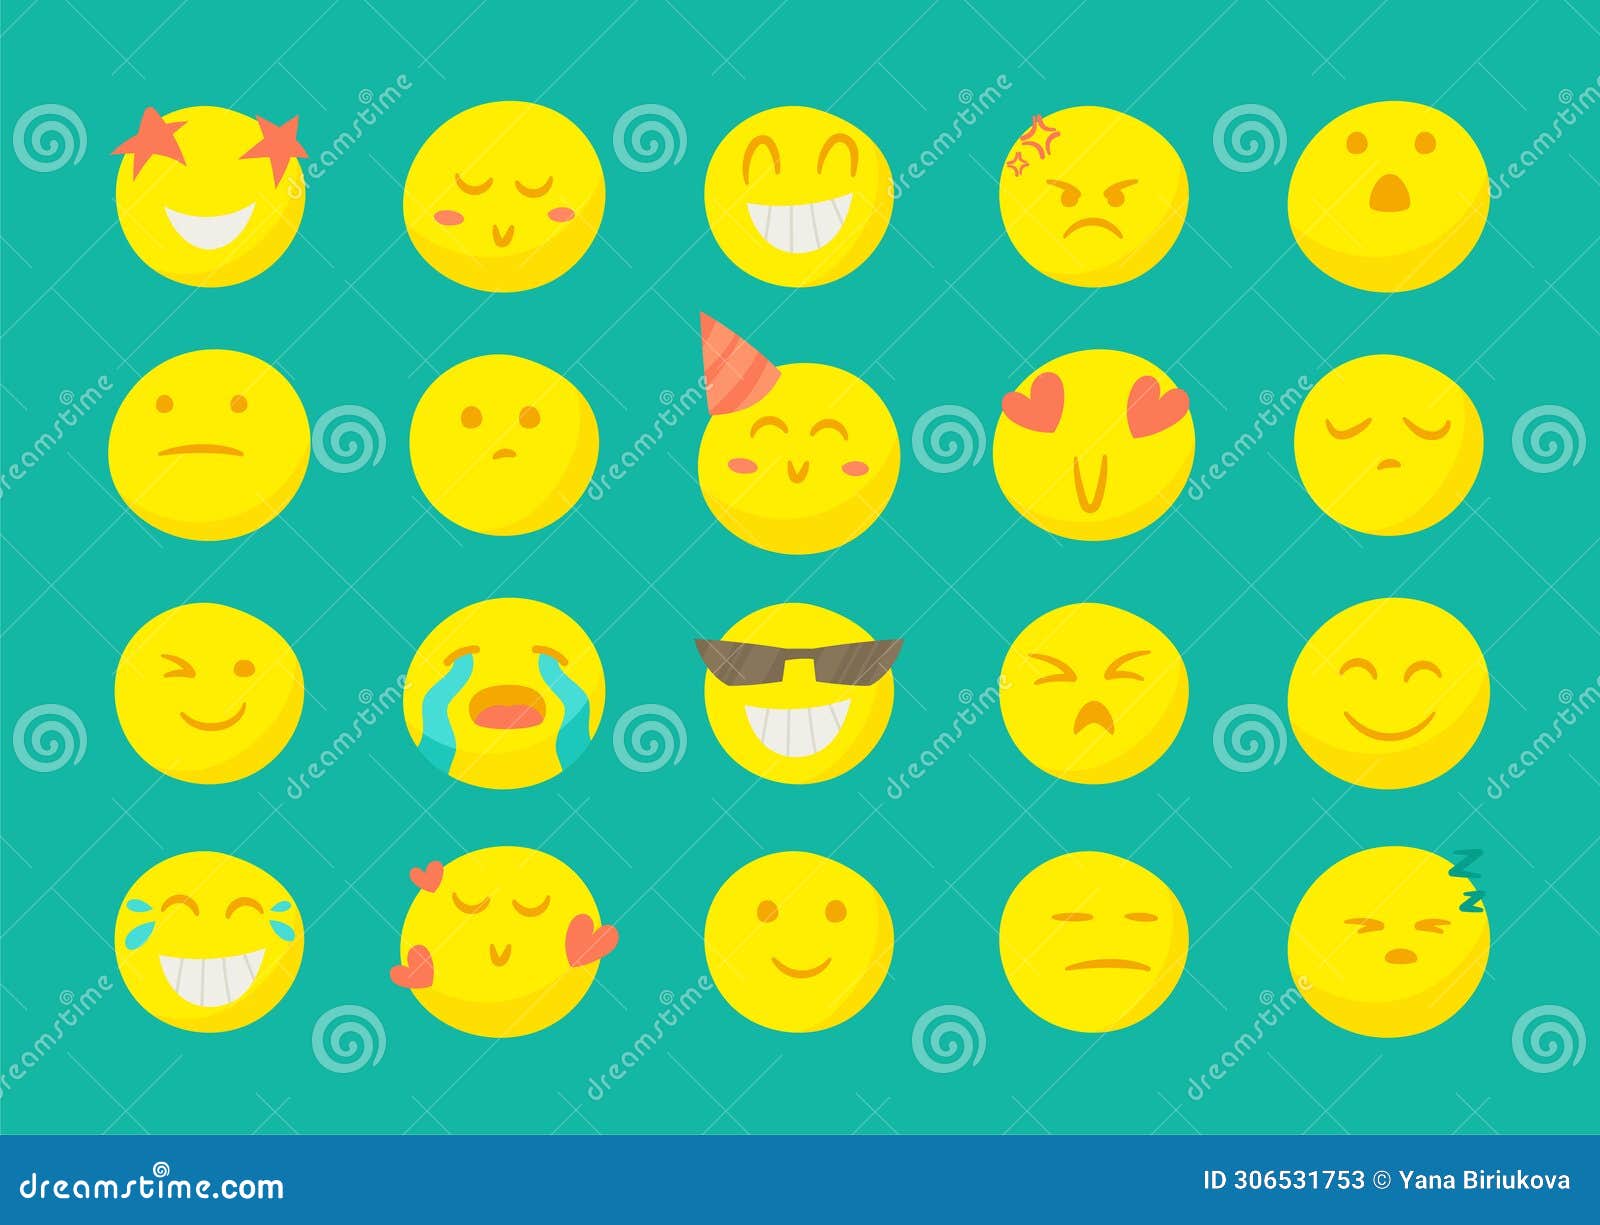 20 Bright Cartoon Smiley Faces. Large Set of Reactions. Emotions Stock ...